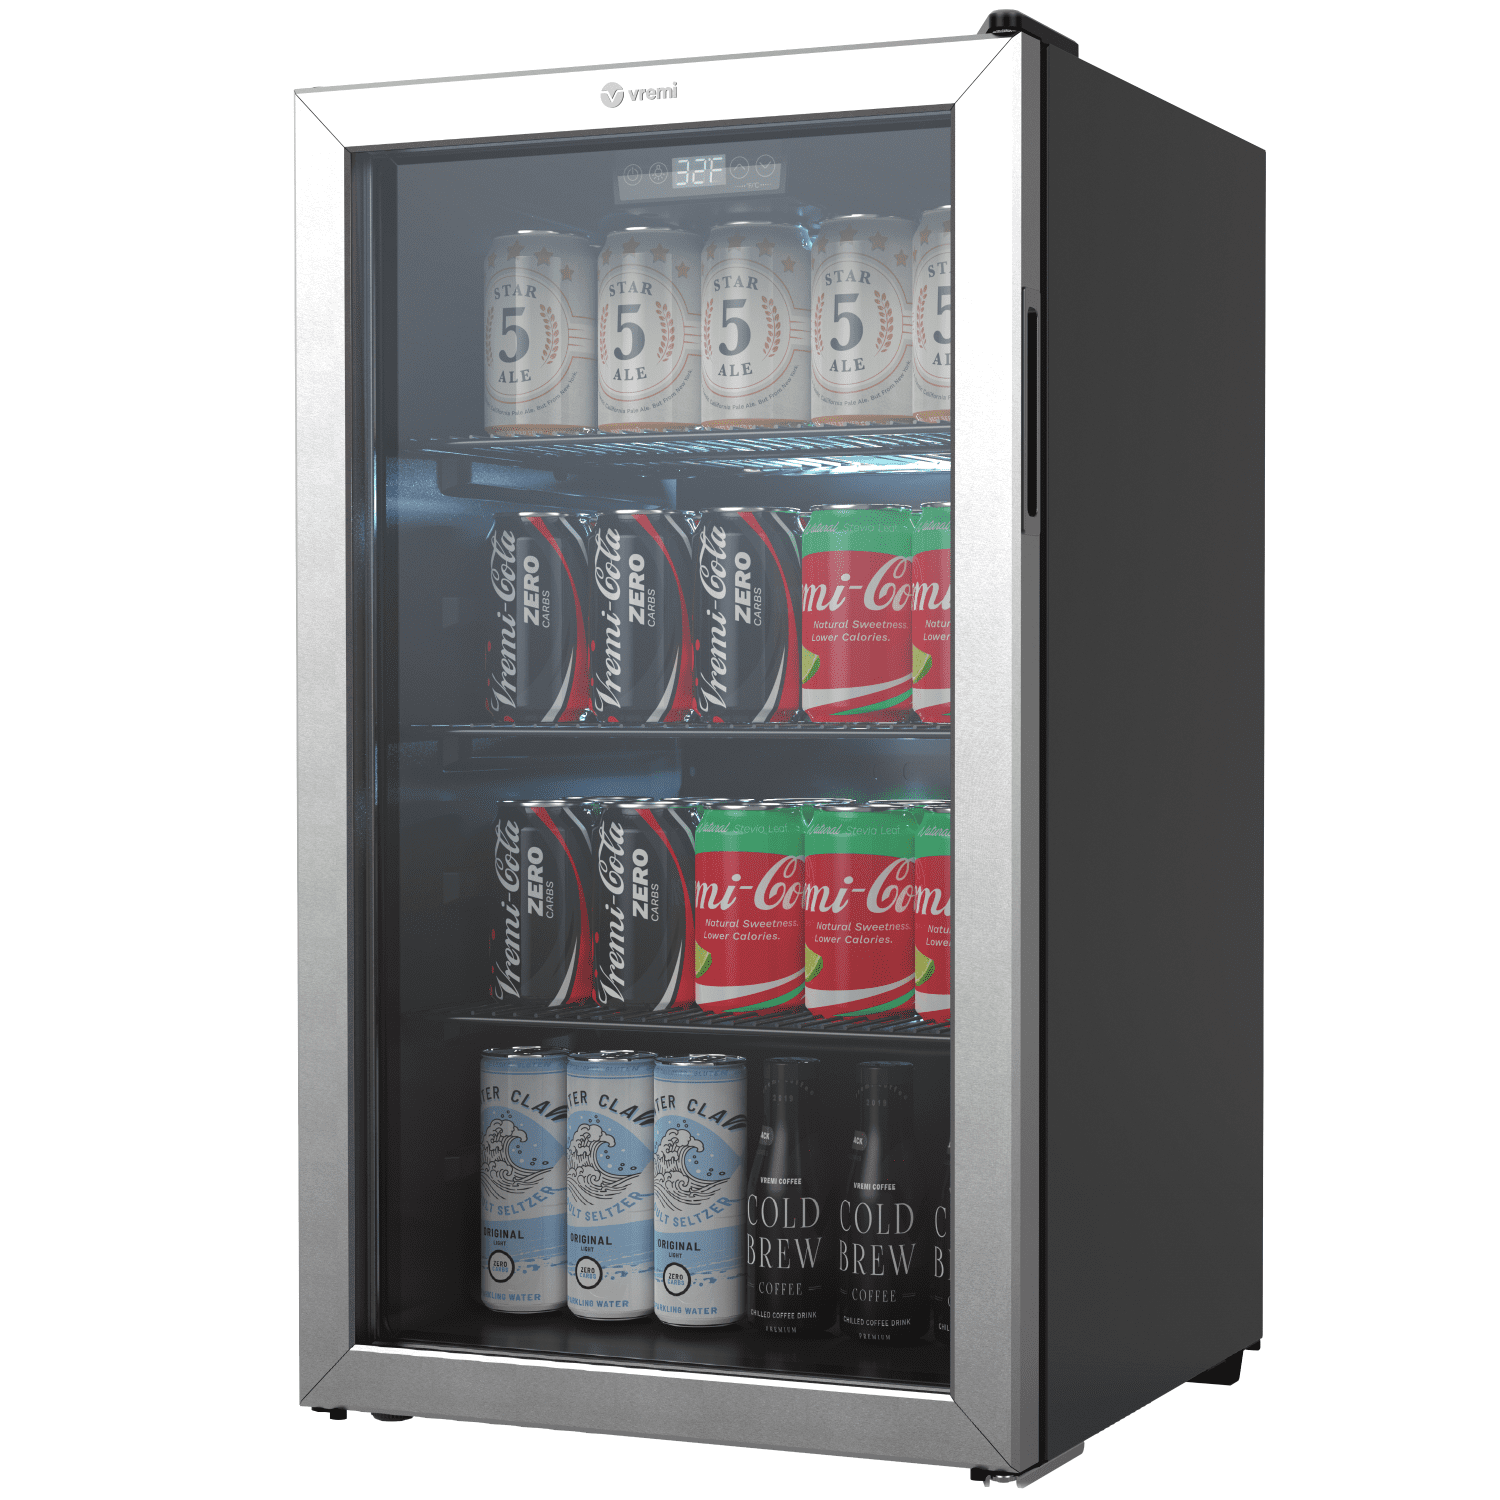 Gray Kismile Beverage Refrigerator and Cooler,60 Can 1.6 Cu.ft Mini Fridge with Glass Door for Soda Beer or Wine,Small Drink Cooler Dispenser Counter Top Refrigerator for Home,Office,or Bar 